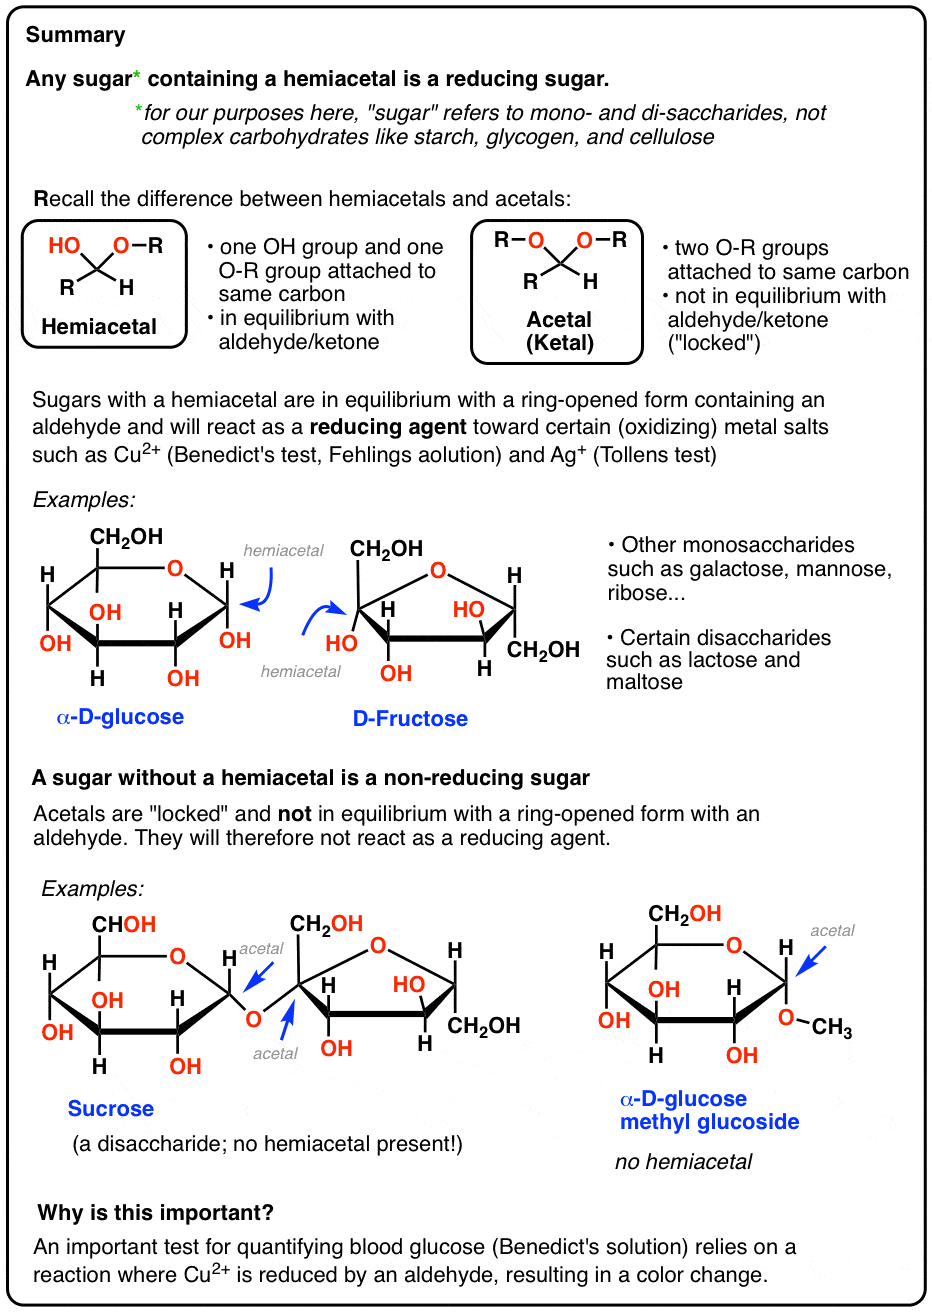 summary-of-what-is-a-reducing-sugar-a-mono-or-disaccharide-containing-a-hemiacetal